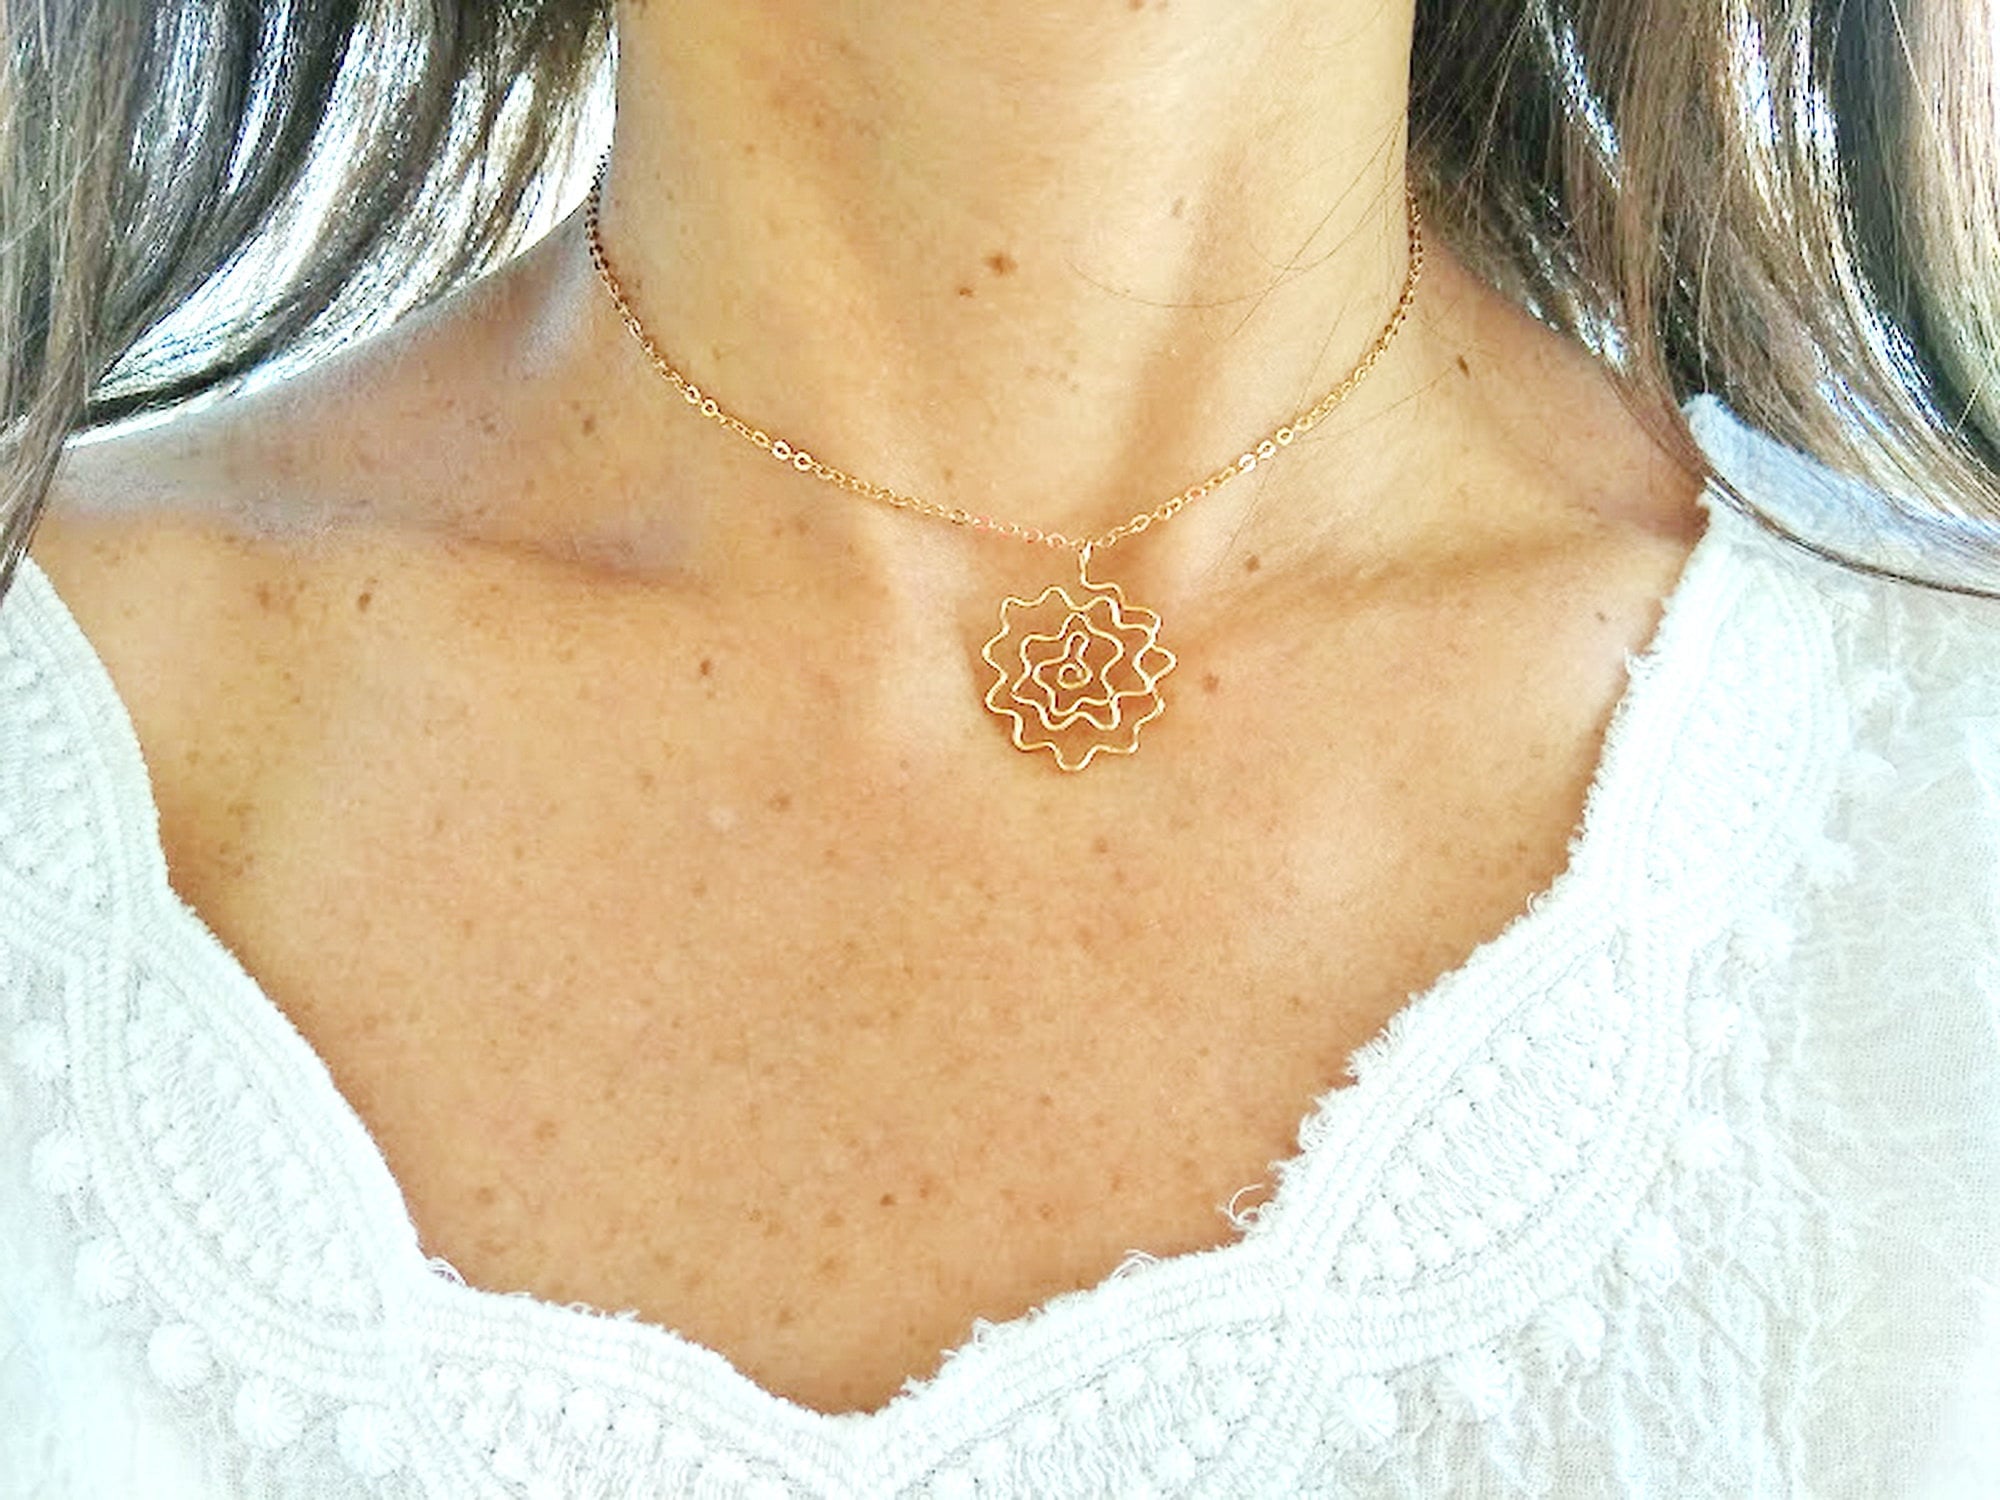 Gold Filled Beaded Chain Choker Necklace — Boy Cherie Jewelry: Delicate  Fashion Jewelry That Won't Break or Tarnish